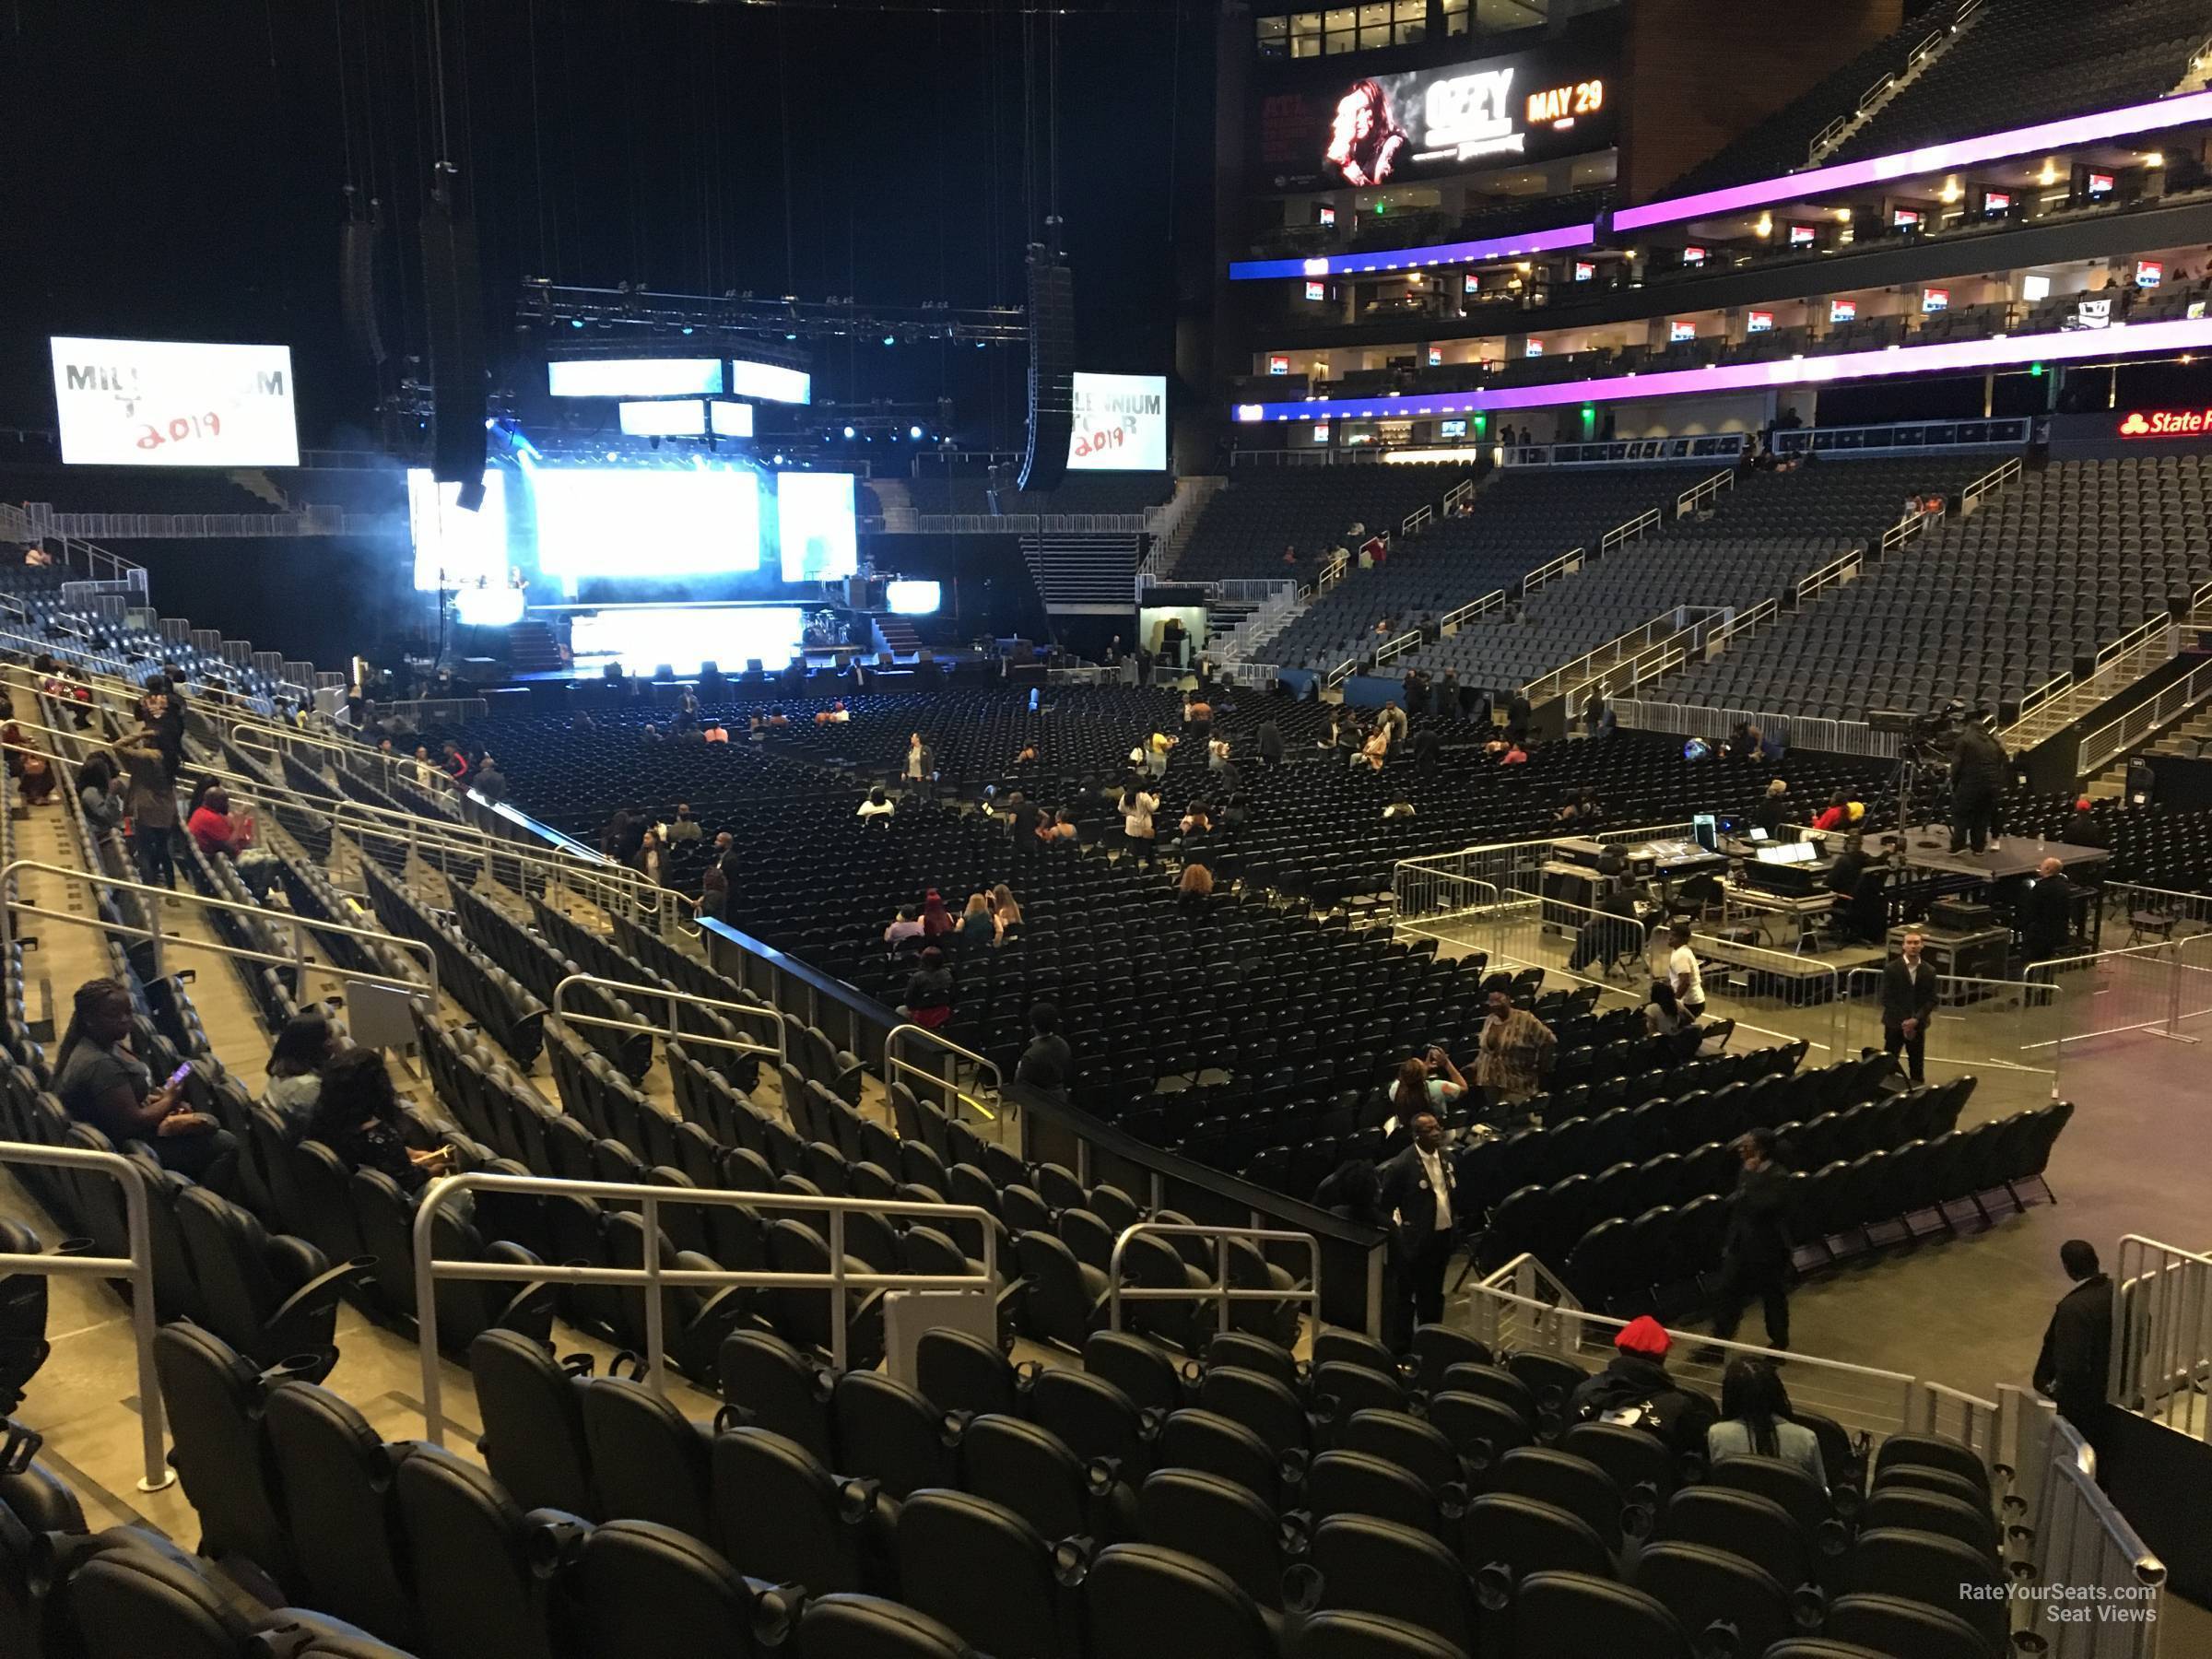 State Farm Arena Section 116 Concert Seating - RateYourSeats.com